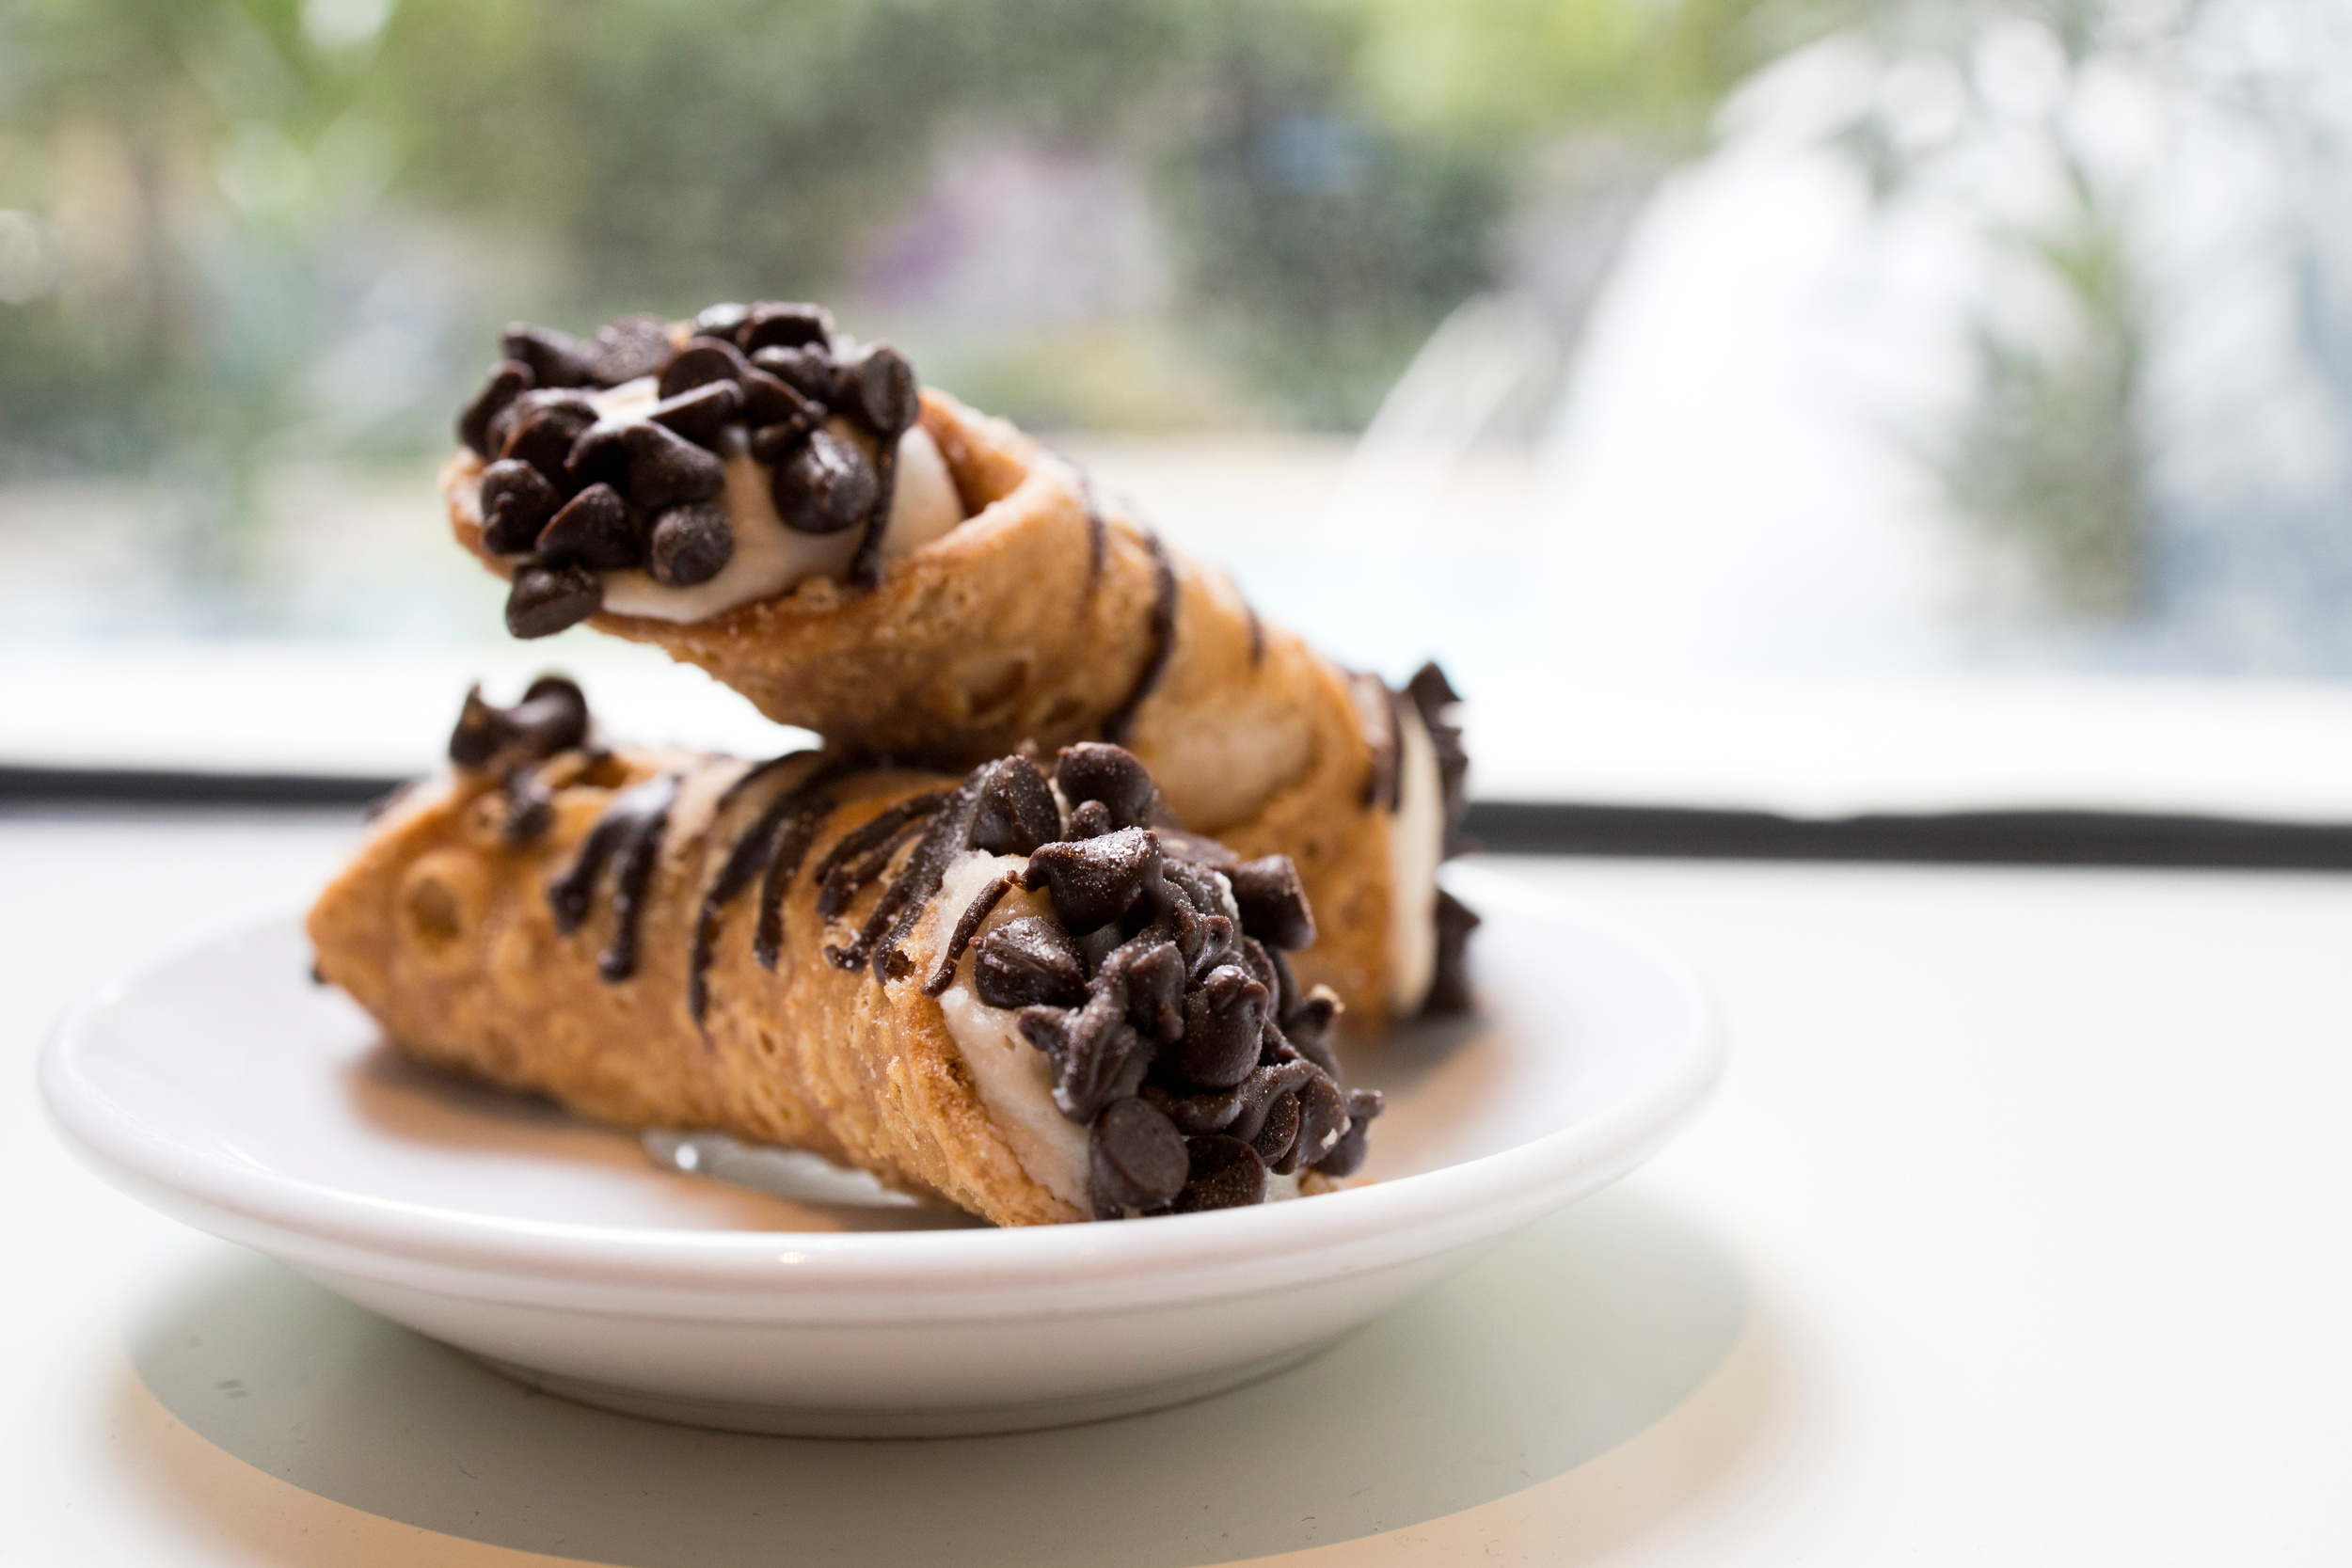 <p>Cannoli — with their creamy filling and delicate exterior — seem like a dessert that can’t possibly be made at home, but <a href="https://www.cookingclassy.com/cannoli/"><span>this recipe from Cooking Classy</span></a> (and some inexpensive cannoli forms) can make it all happen. The process is more time-consuming than many other options on this list, but we assure you it’s worth it…and your guests will be shocked that your dessert is homemade.</p><p>You may also like: <a href='https://www.yardbarker.com/lifestyle/articles/20_hacks_for_small_apartment_living/s1__38367515'>20 hacks for small apartment living</a></p>